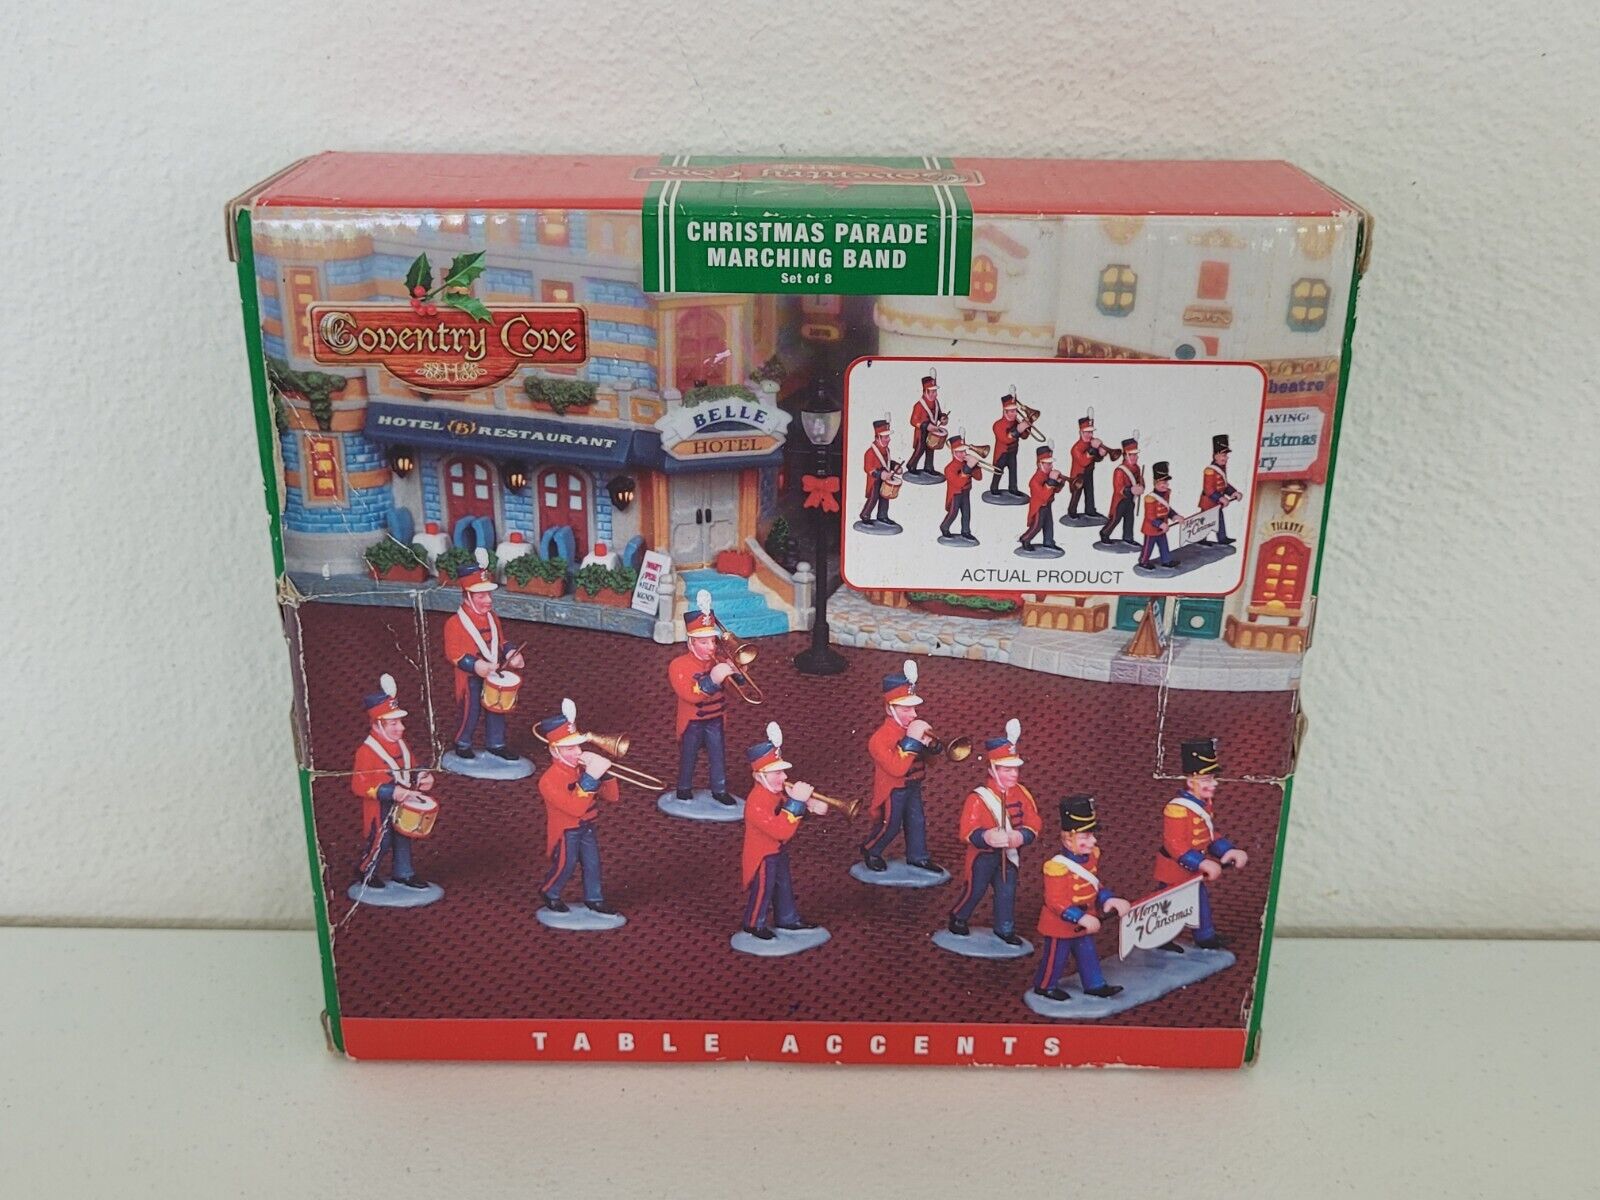 2009 Lemax Coventry Cove Christmas Parade Marching Band Set Of 8 Retired 93766